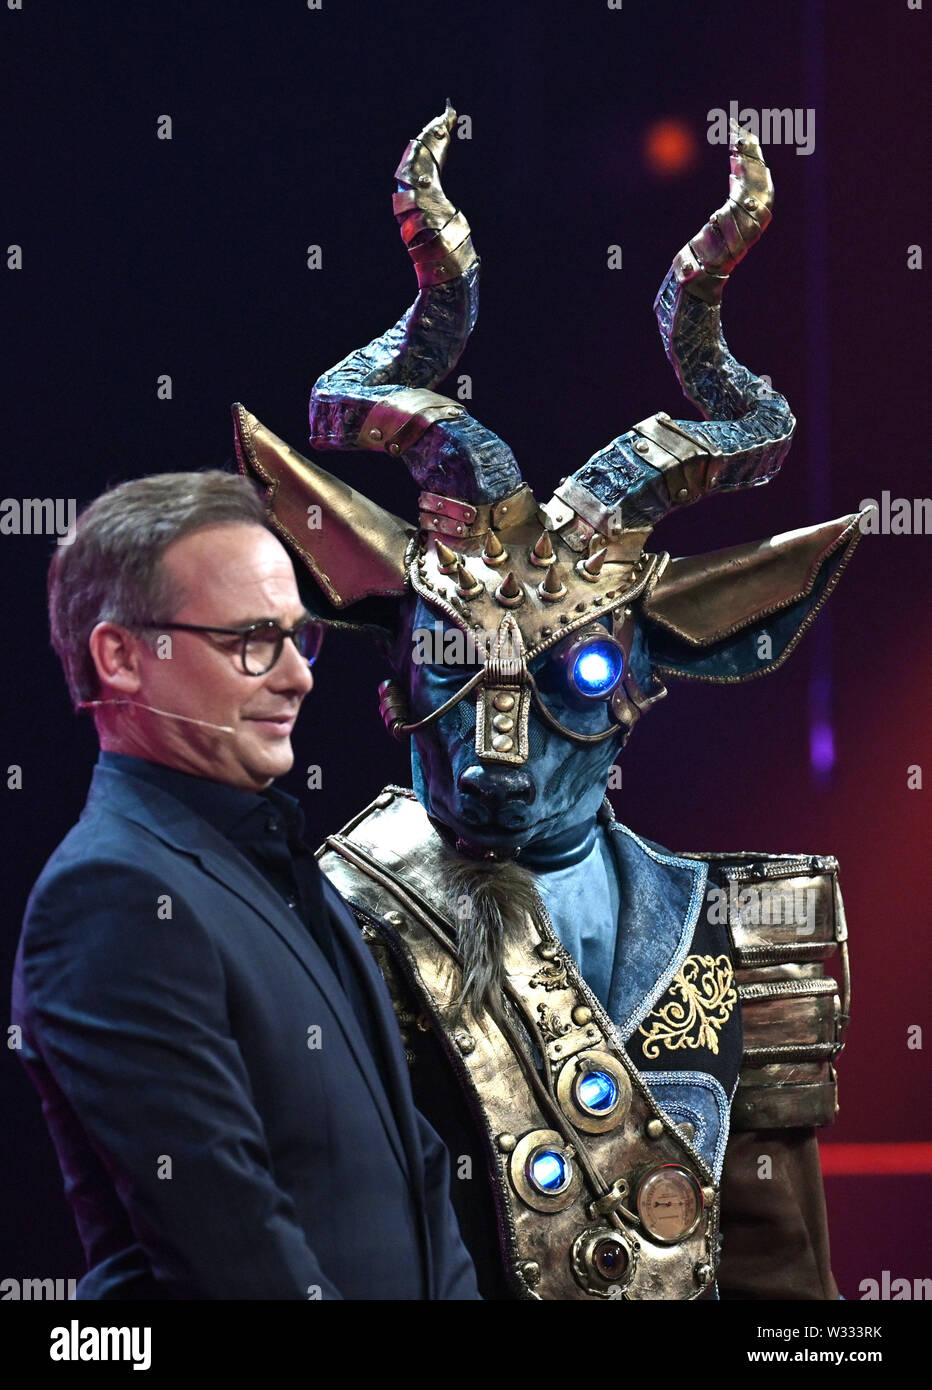 Cologne, Germany. 11th July, 2019. The presenter Matthias Opdenhövel (l)  and the Kudu (r) are on stage at the ProSieben show "The Masked Singer".  Credit: Henning Kaiser/dpa/Alamy Live News Stock Photo -